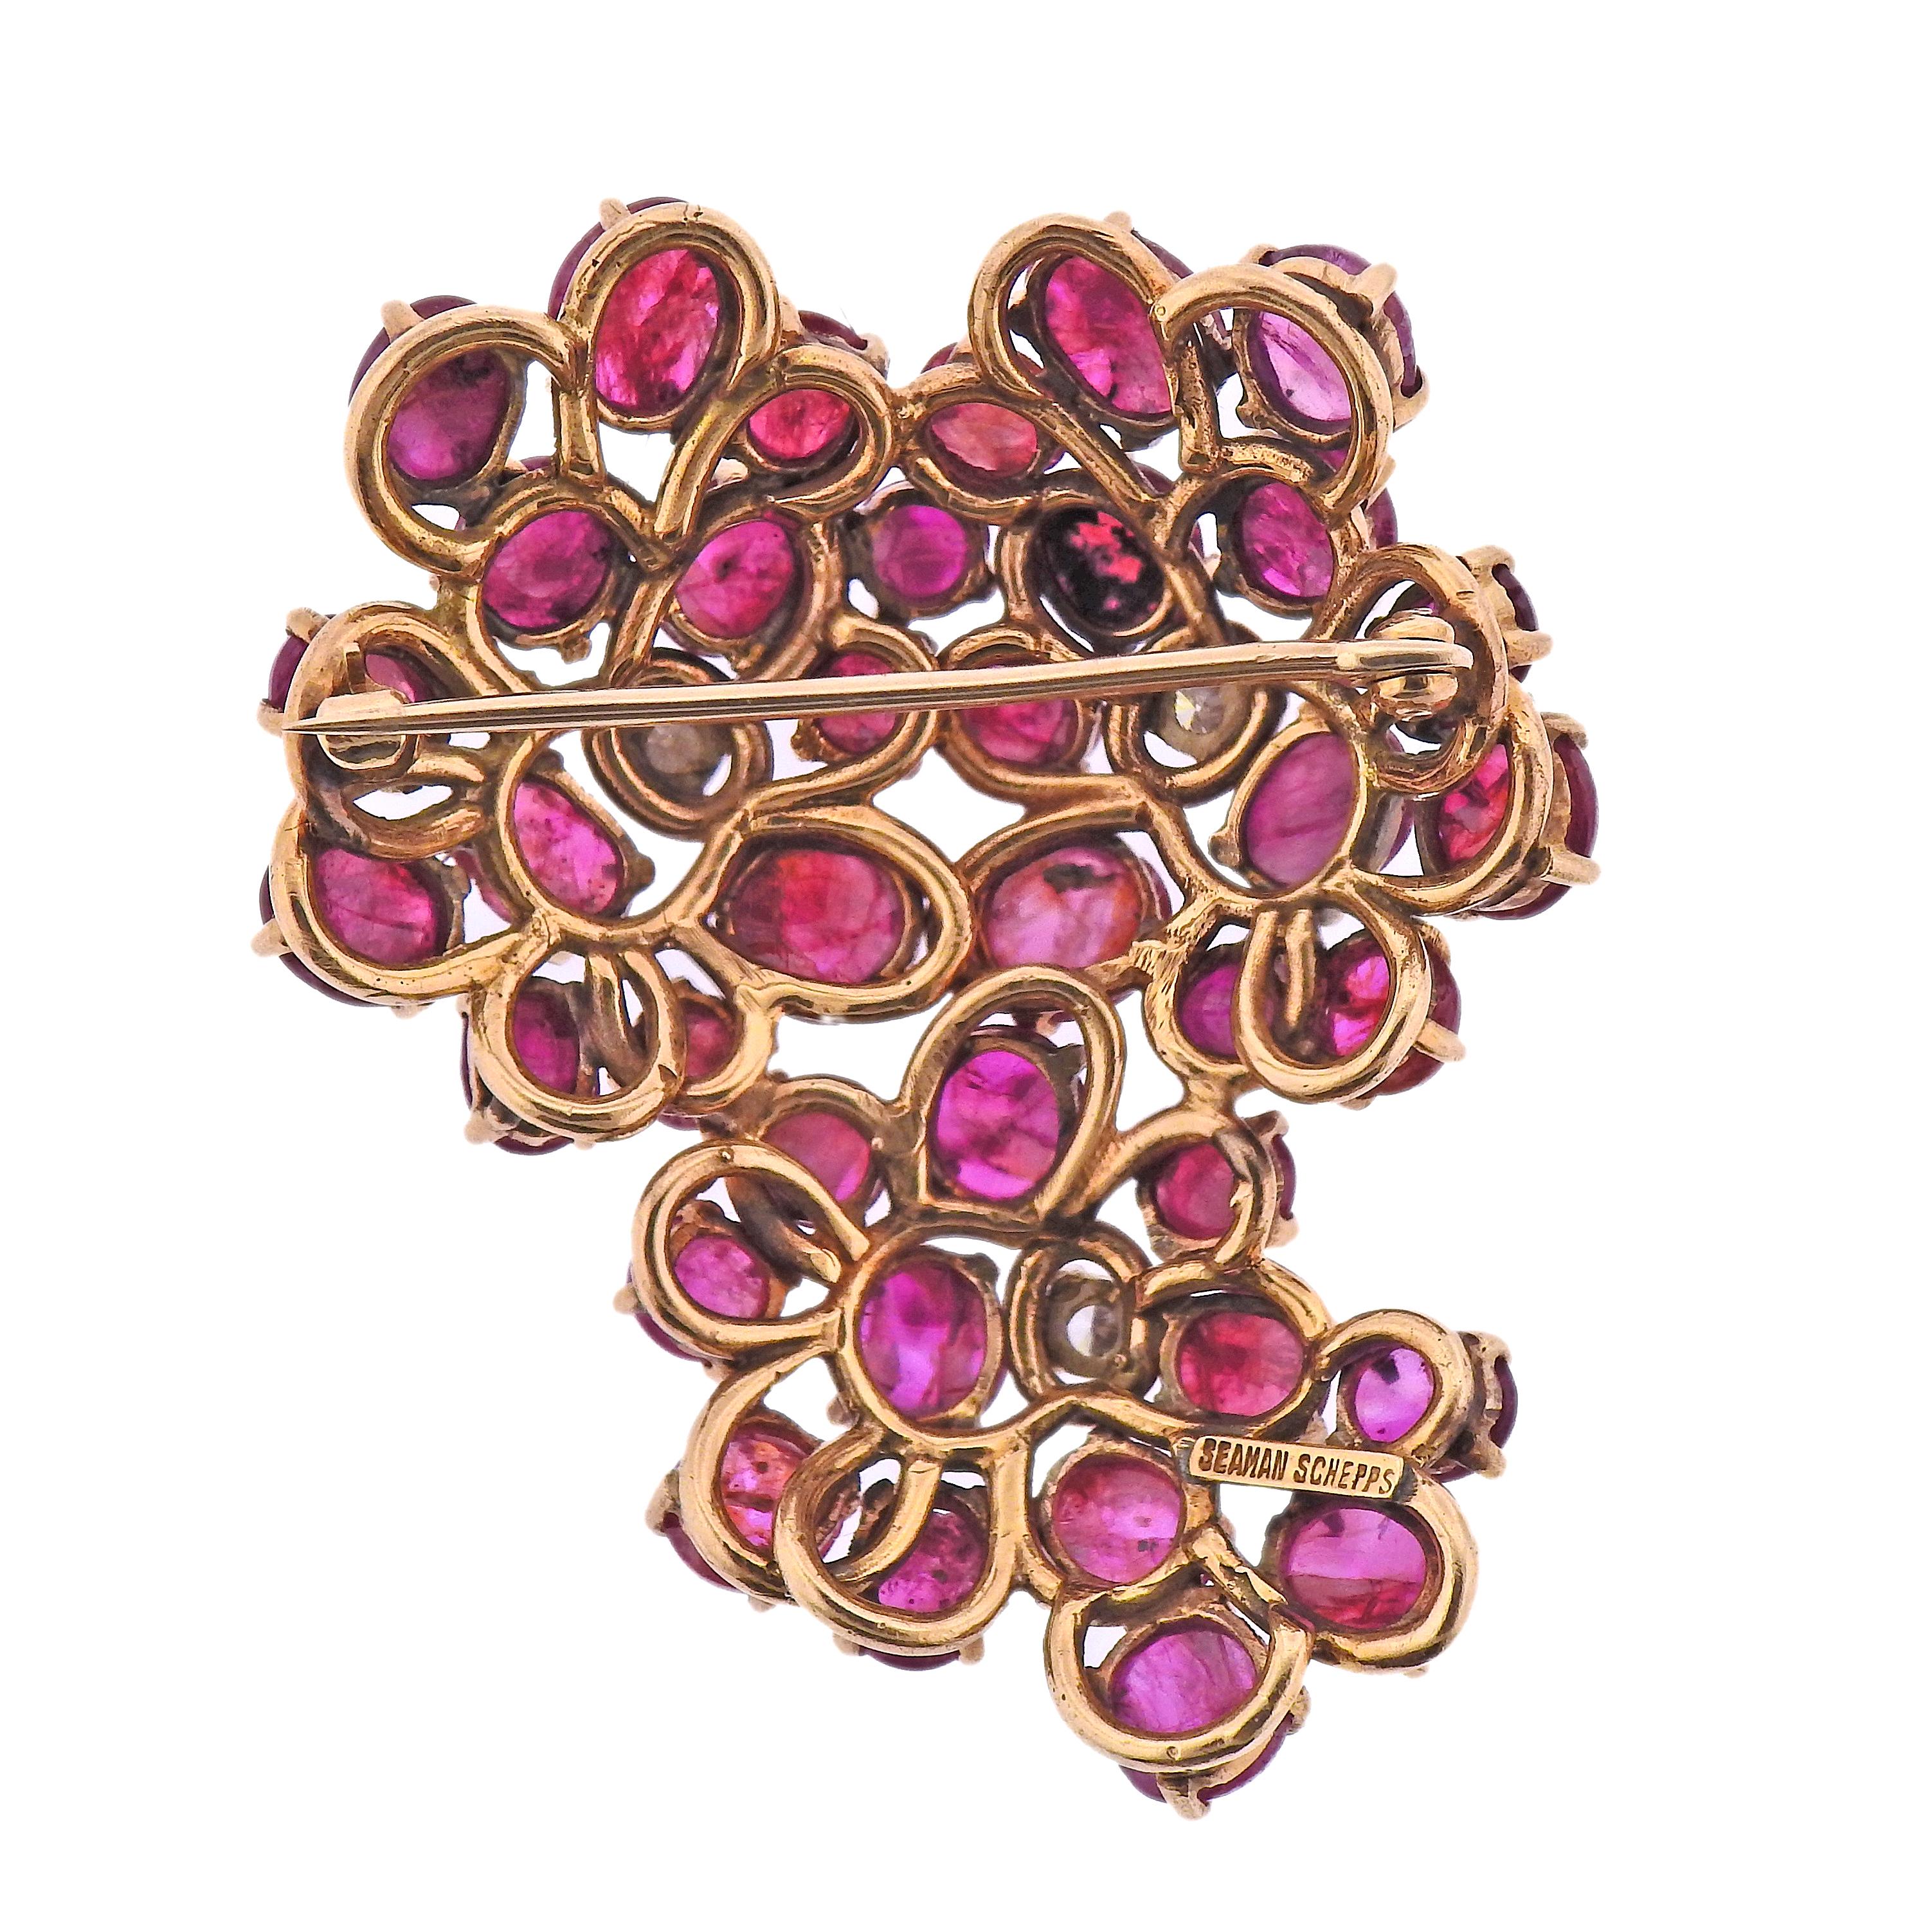 Vintage 14k gold brooch by Seaman Schepps, with three diamonds - approx. 0.45ctw and ruby cabochons (multiple stones have chips). Brooch measures 2.25